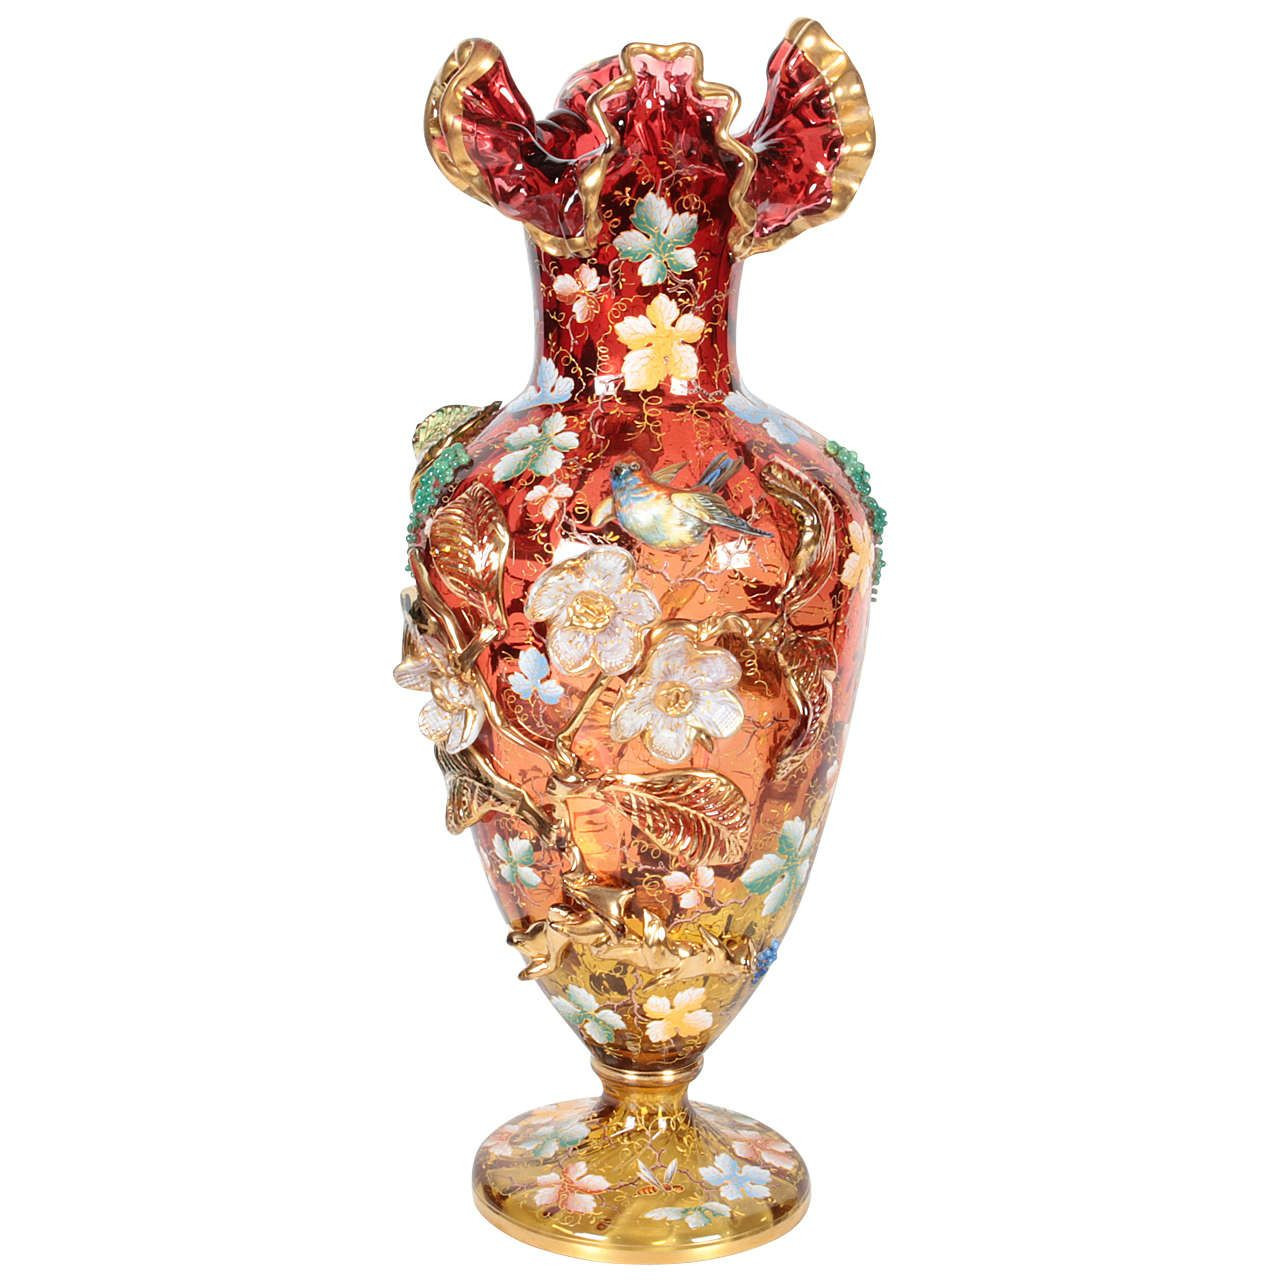 16 Lovely Amber Colored Vases 2024 free download amber colored vases of moser glass amberina red vase with raised flowers leaves jewels with regard to moser glass amberina red vase with raised flowers leaves jewels and bird from a unique c